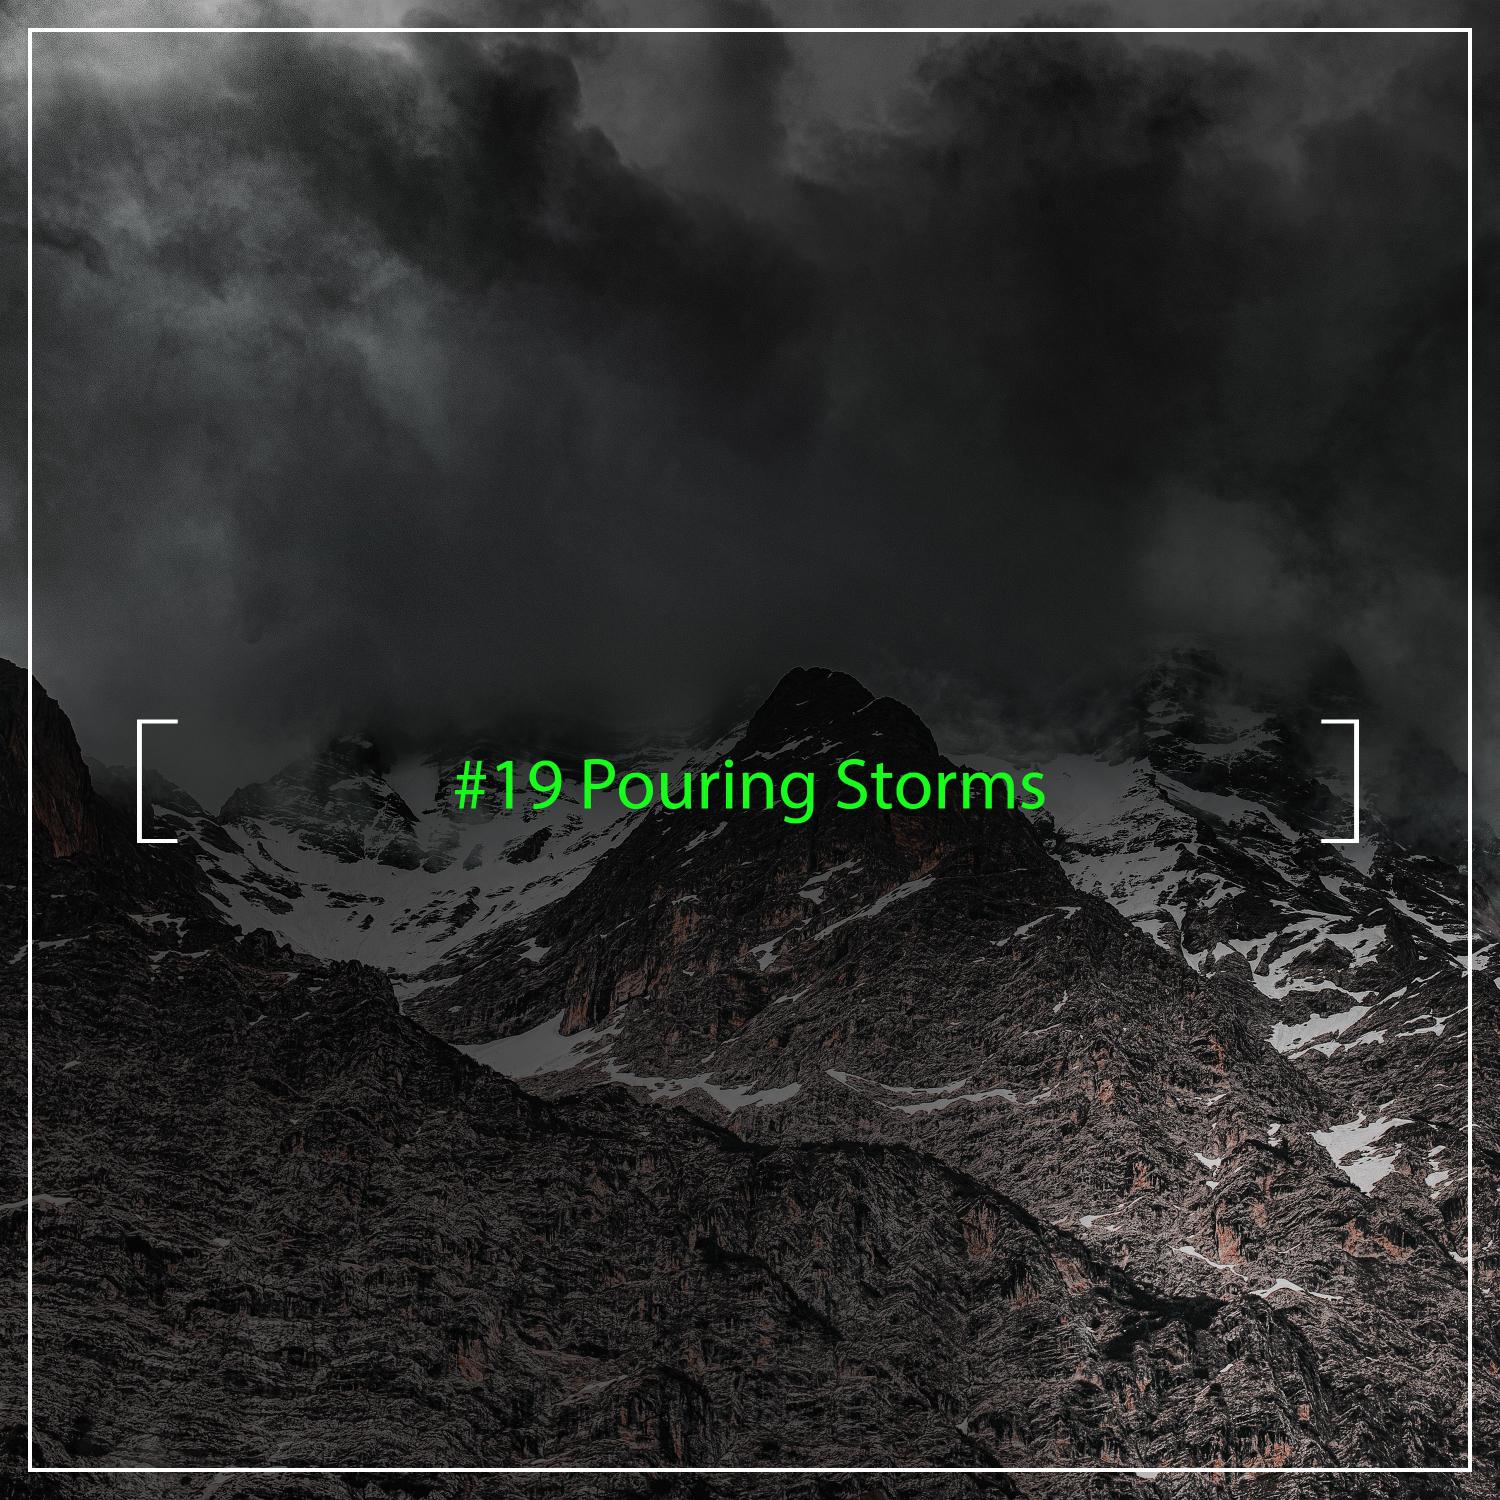 #19 Pouring Storms